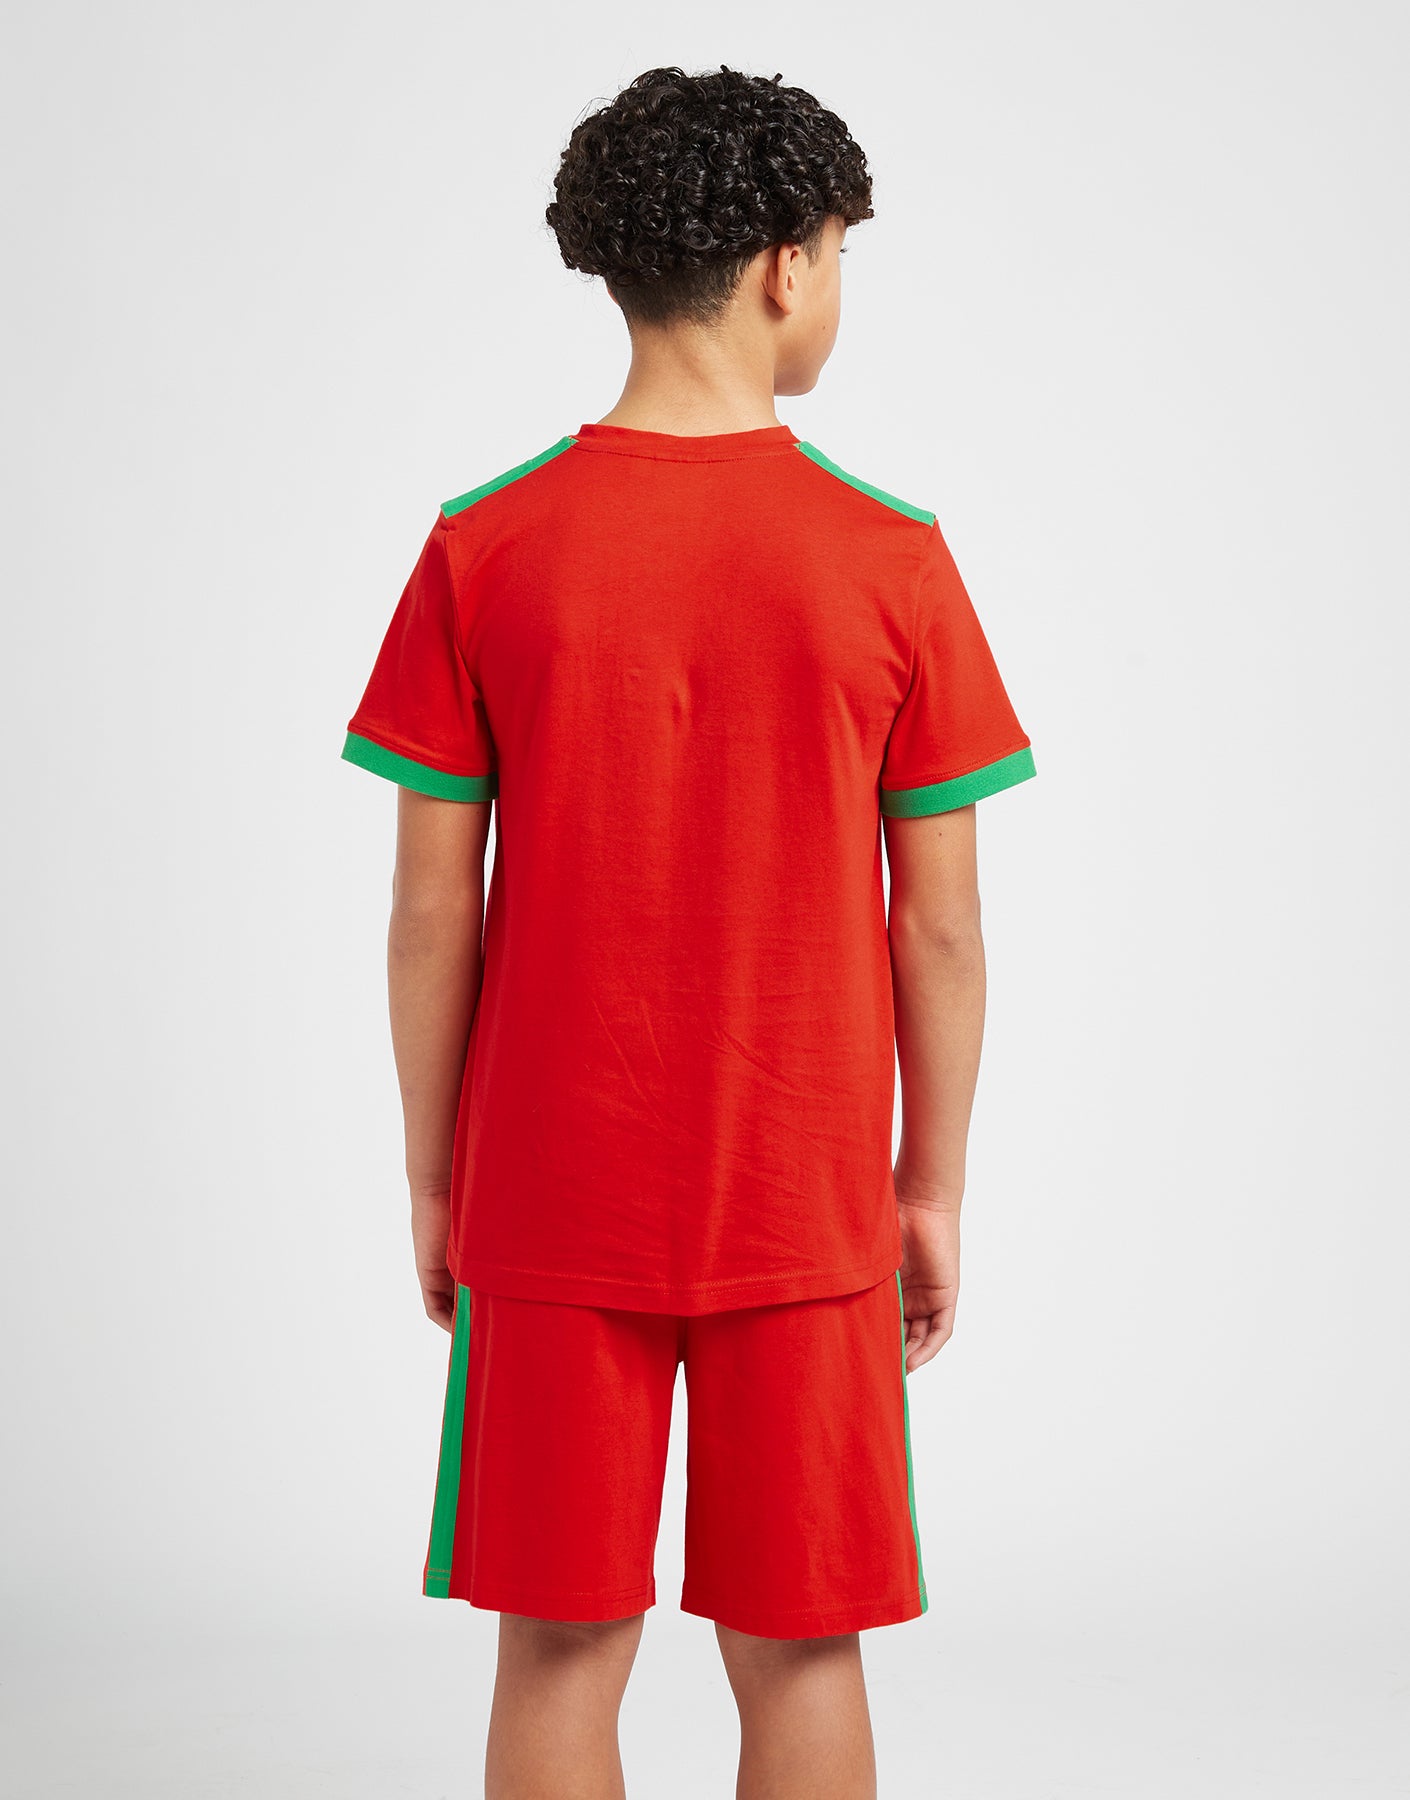 Official Team Wales Pyjama Set - Red - The World Football Store